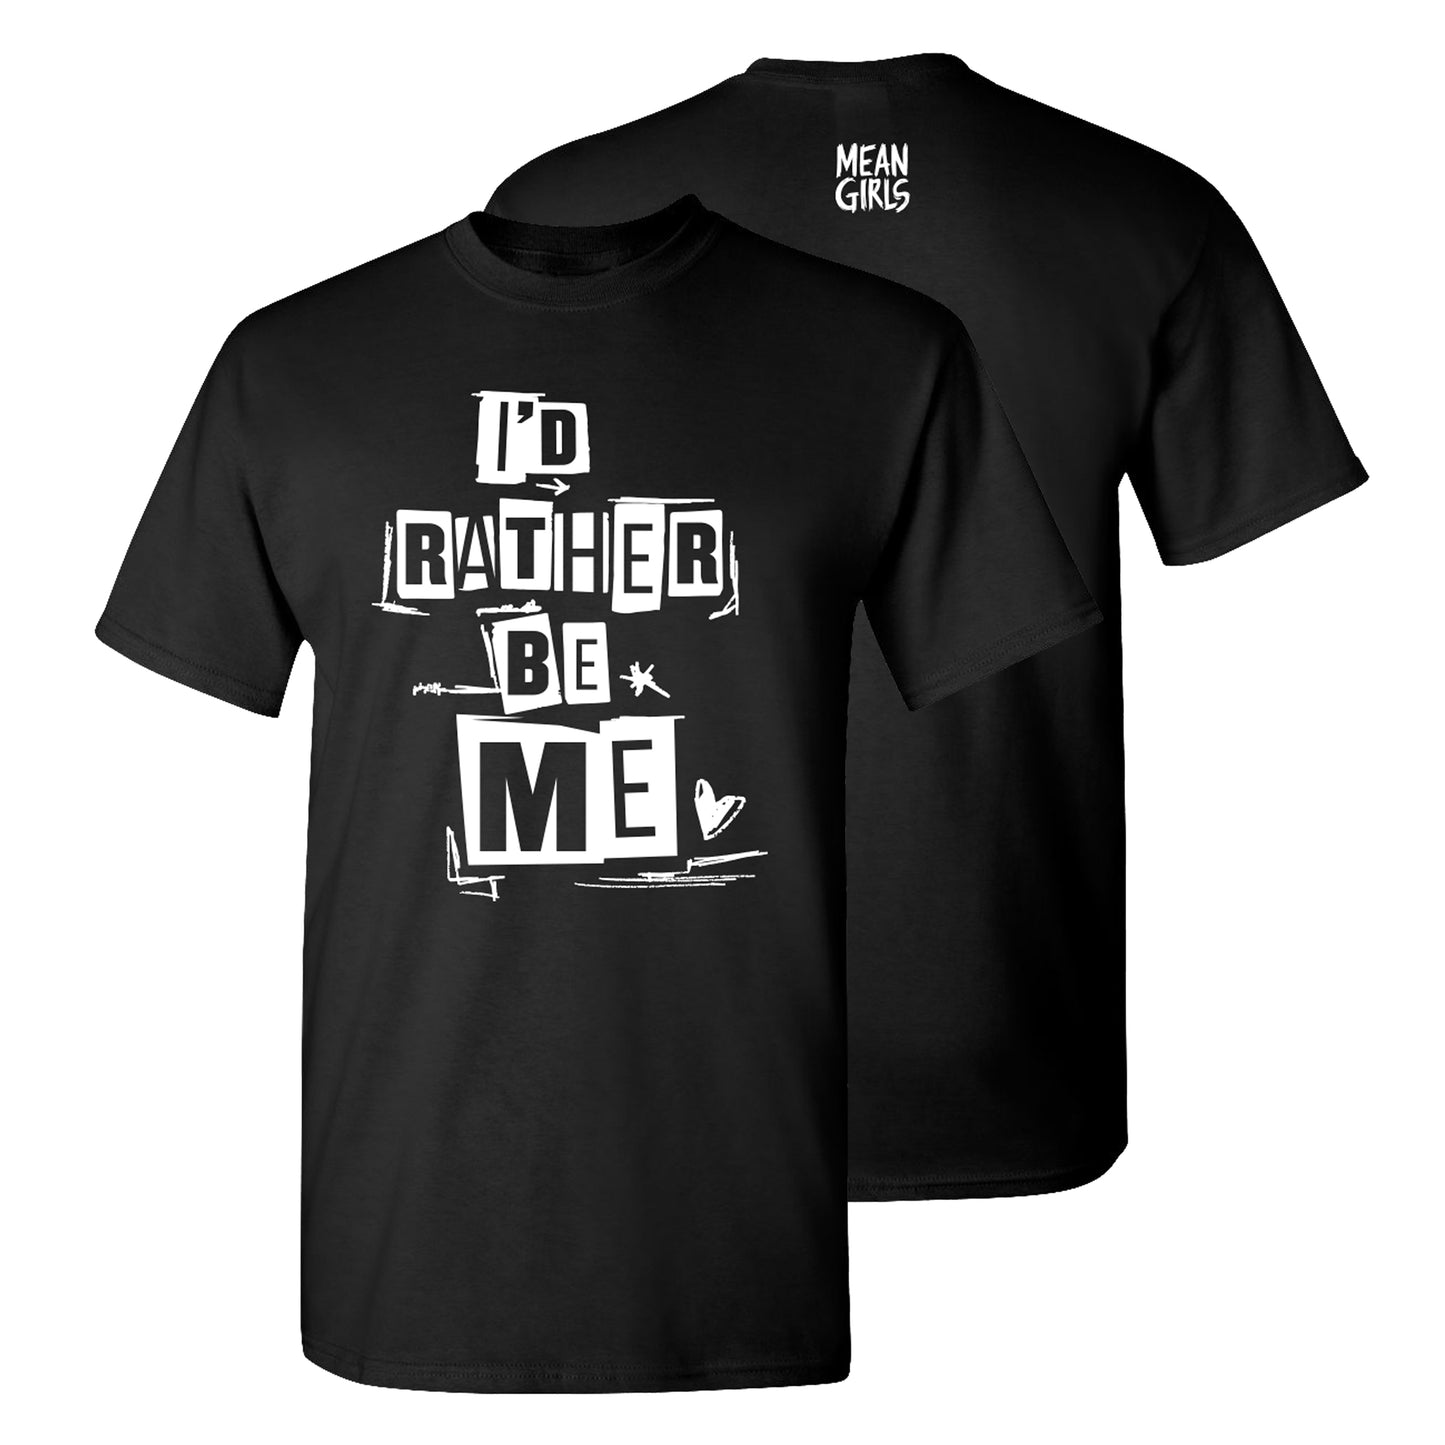 MEAN GIRLS I'd Rather Be Me T-Shirt